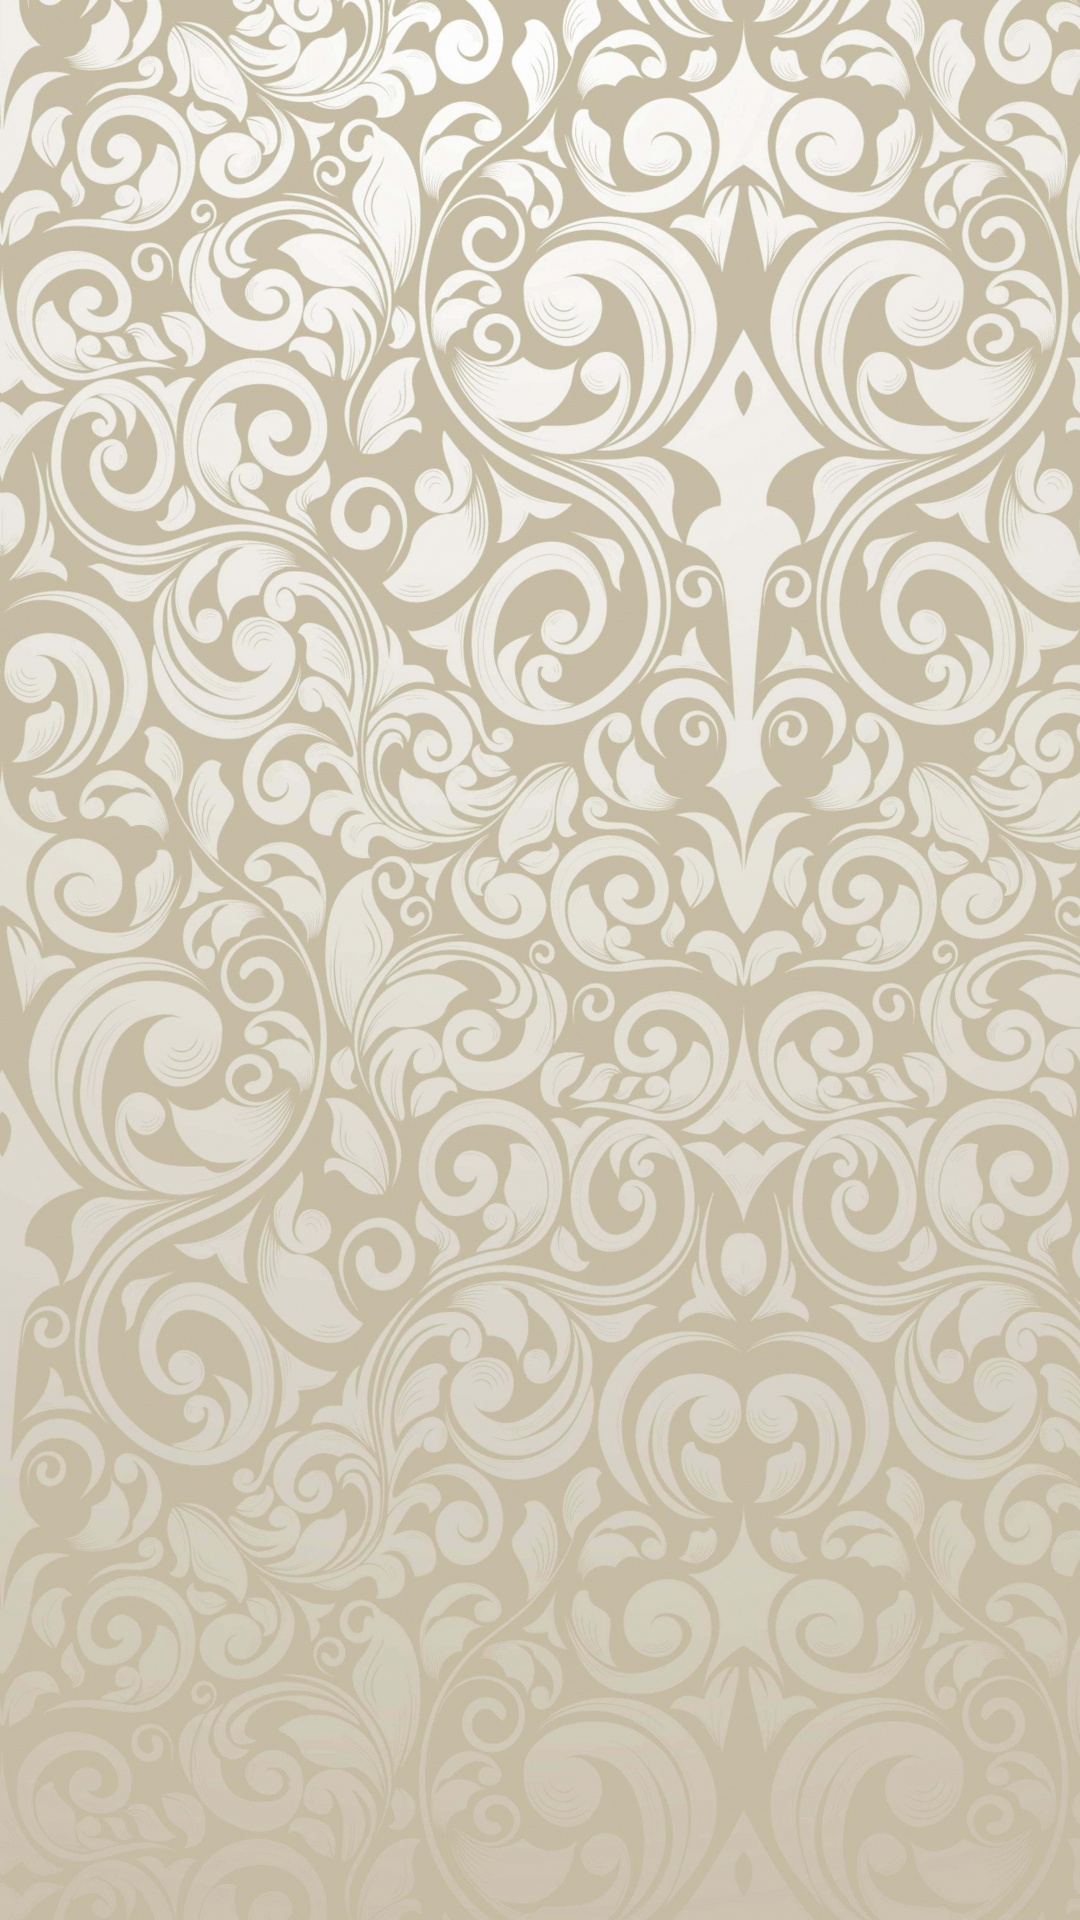 White and Black Floral Textile. Wallpaper in 1080x1920 Resolution